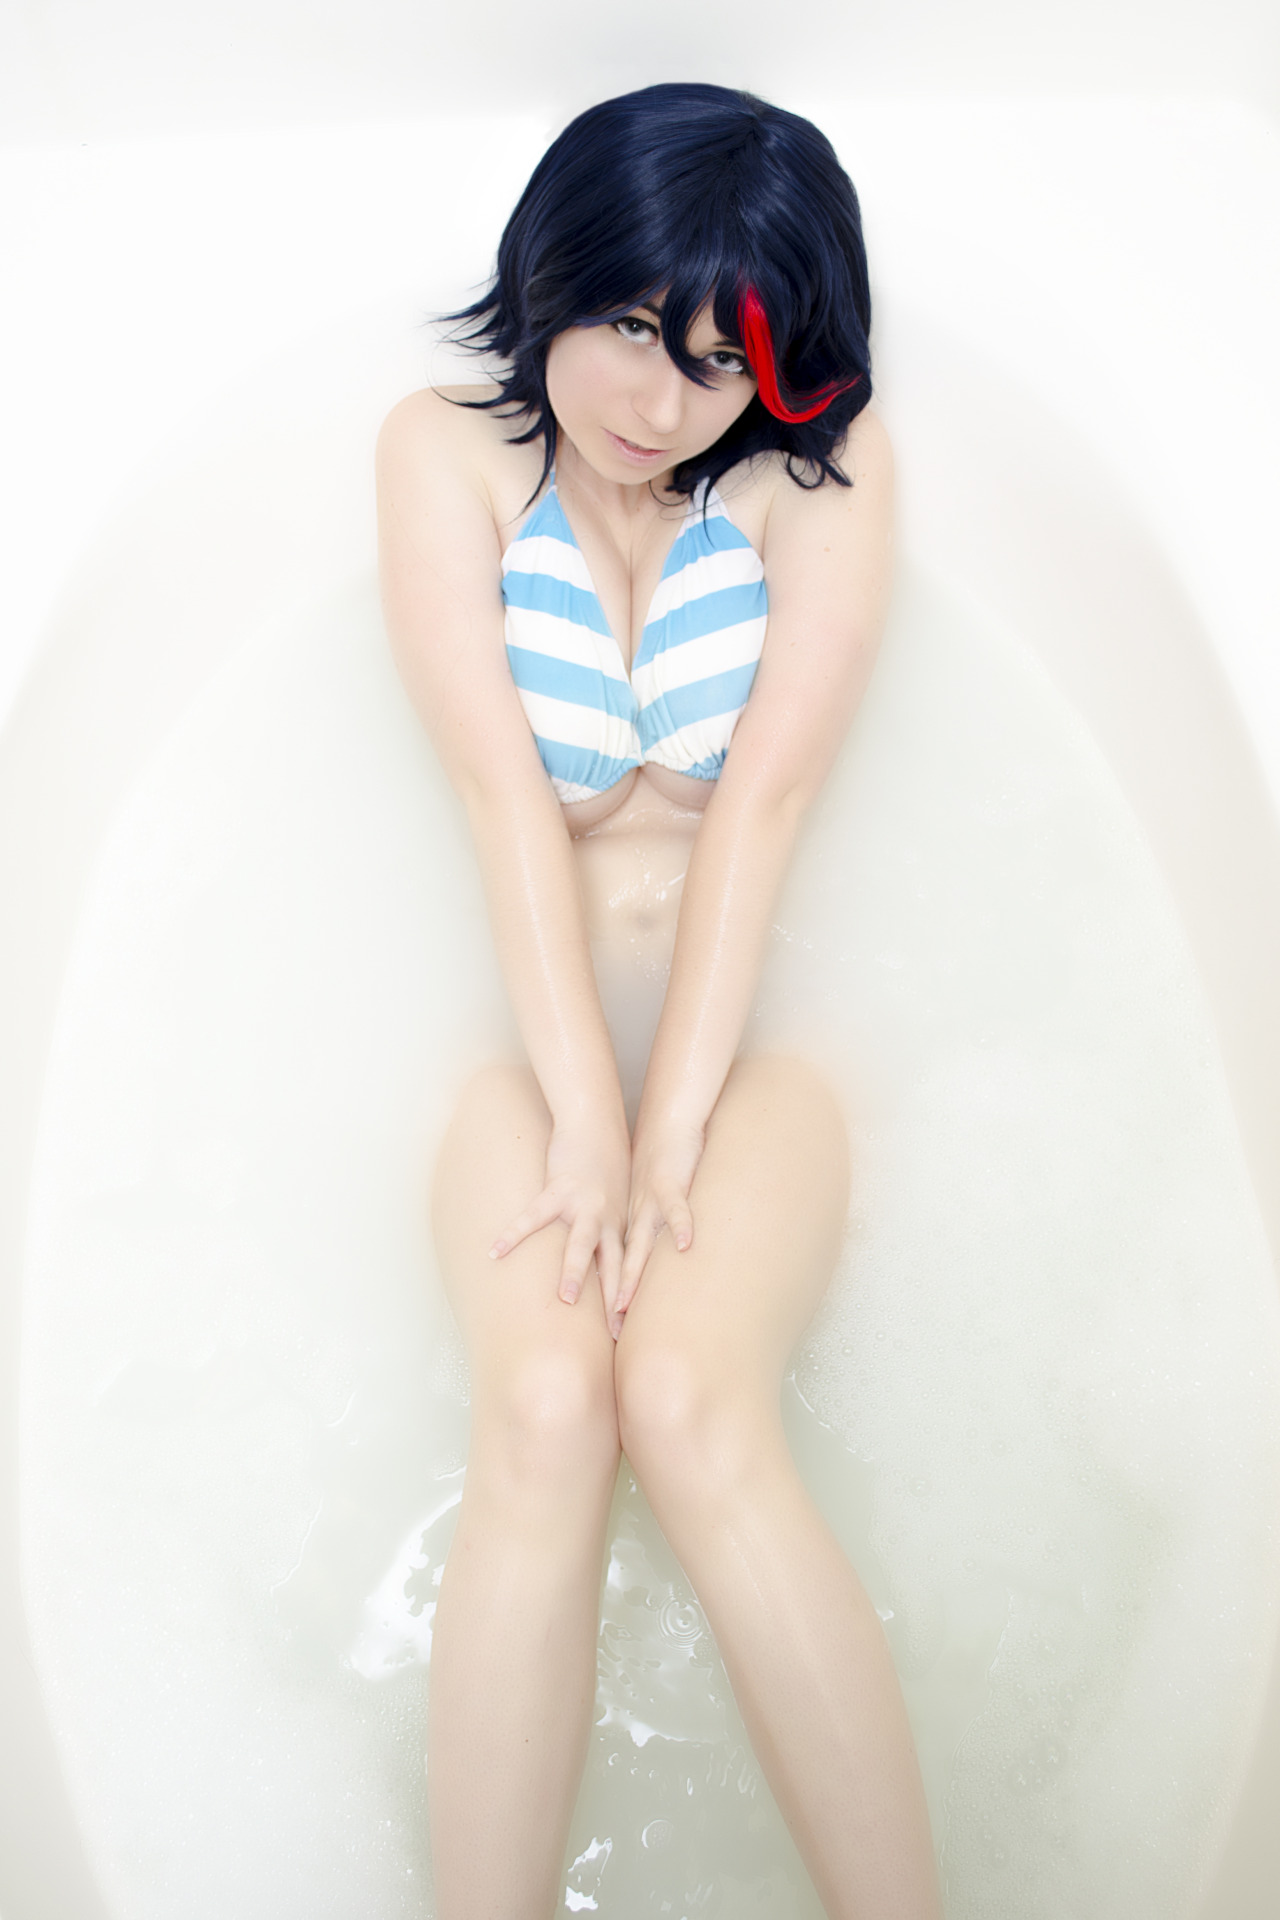 usatame:  My newest Solo Donation Set is now available! &lt;3Ryuko enjoys a nice